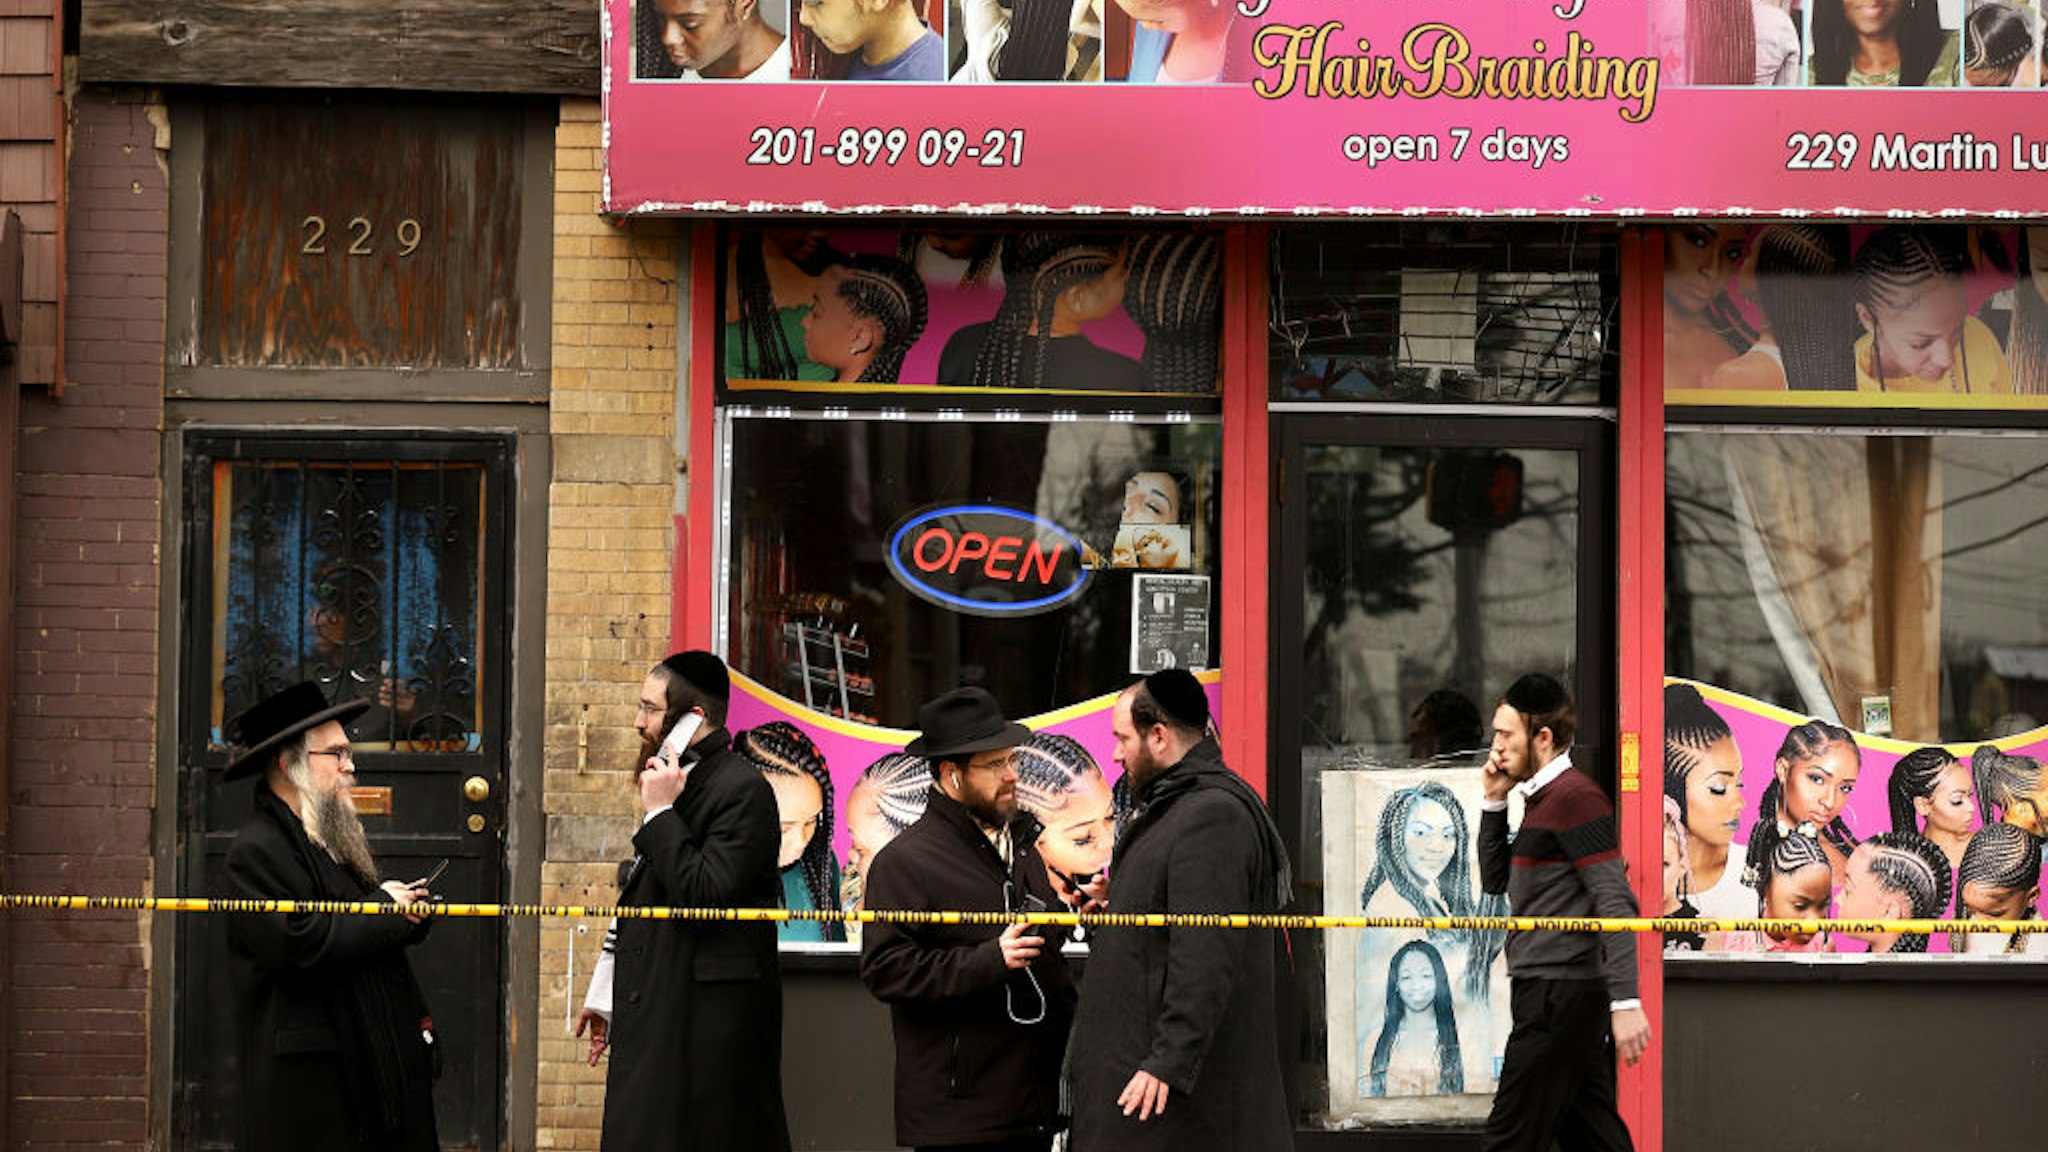 Members of the Jewish community pass by near the scene of a mass shooting at the JC Kosher Supermarket on December 11, 2019 in Jersey City, New Jersey.